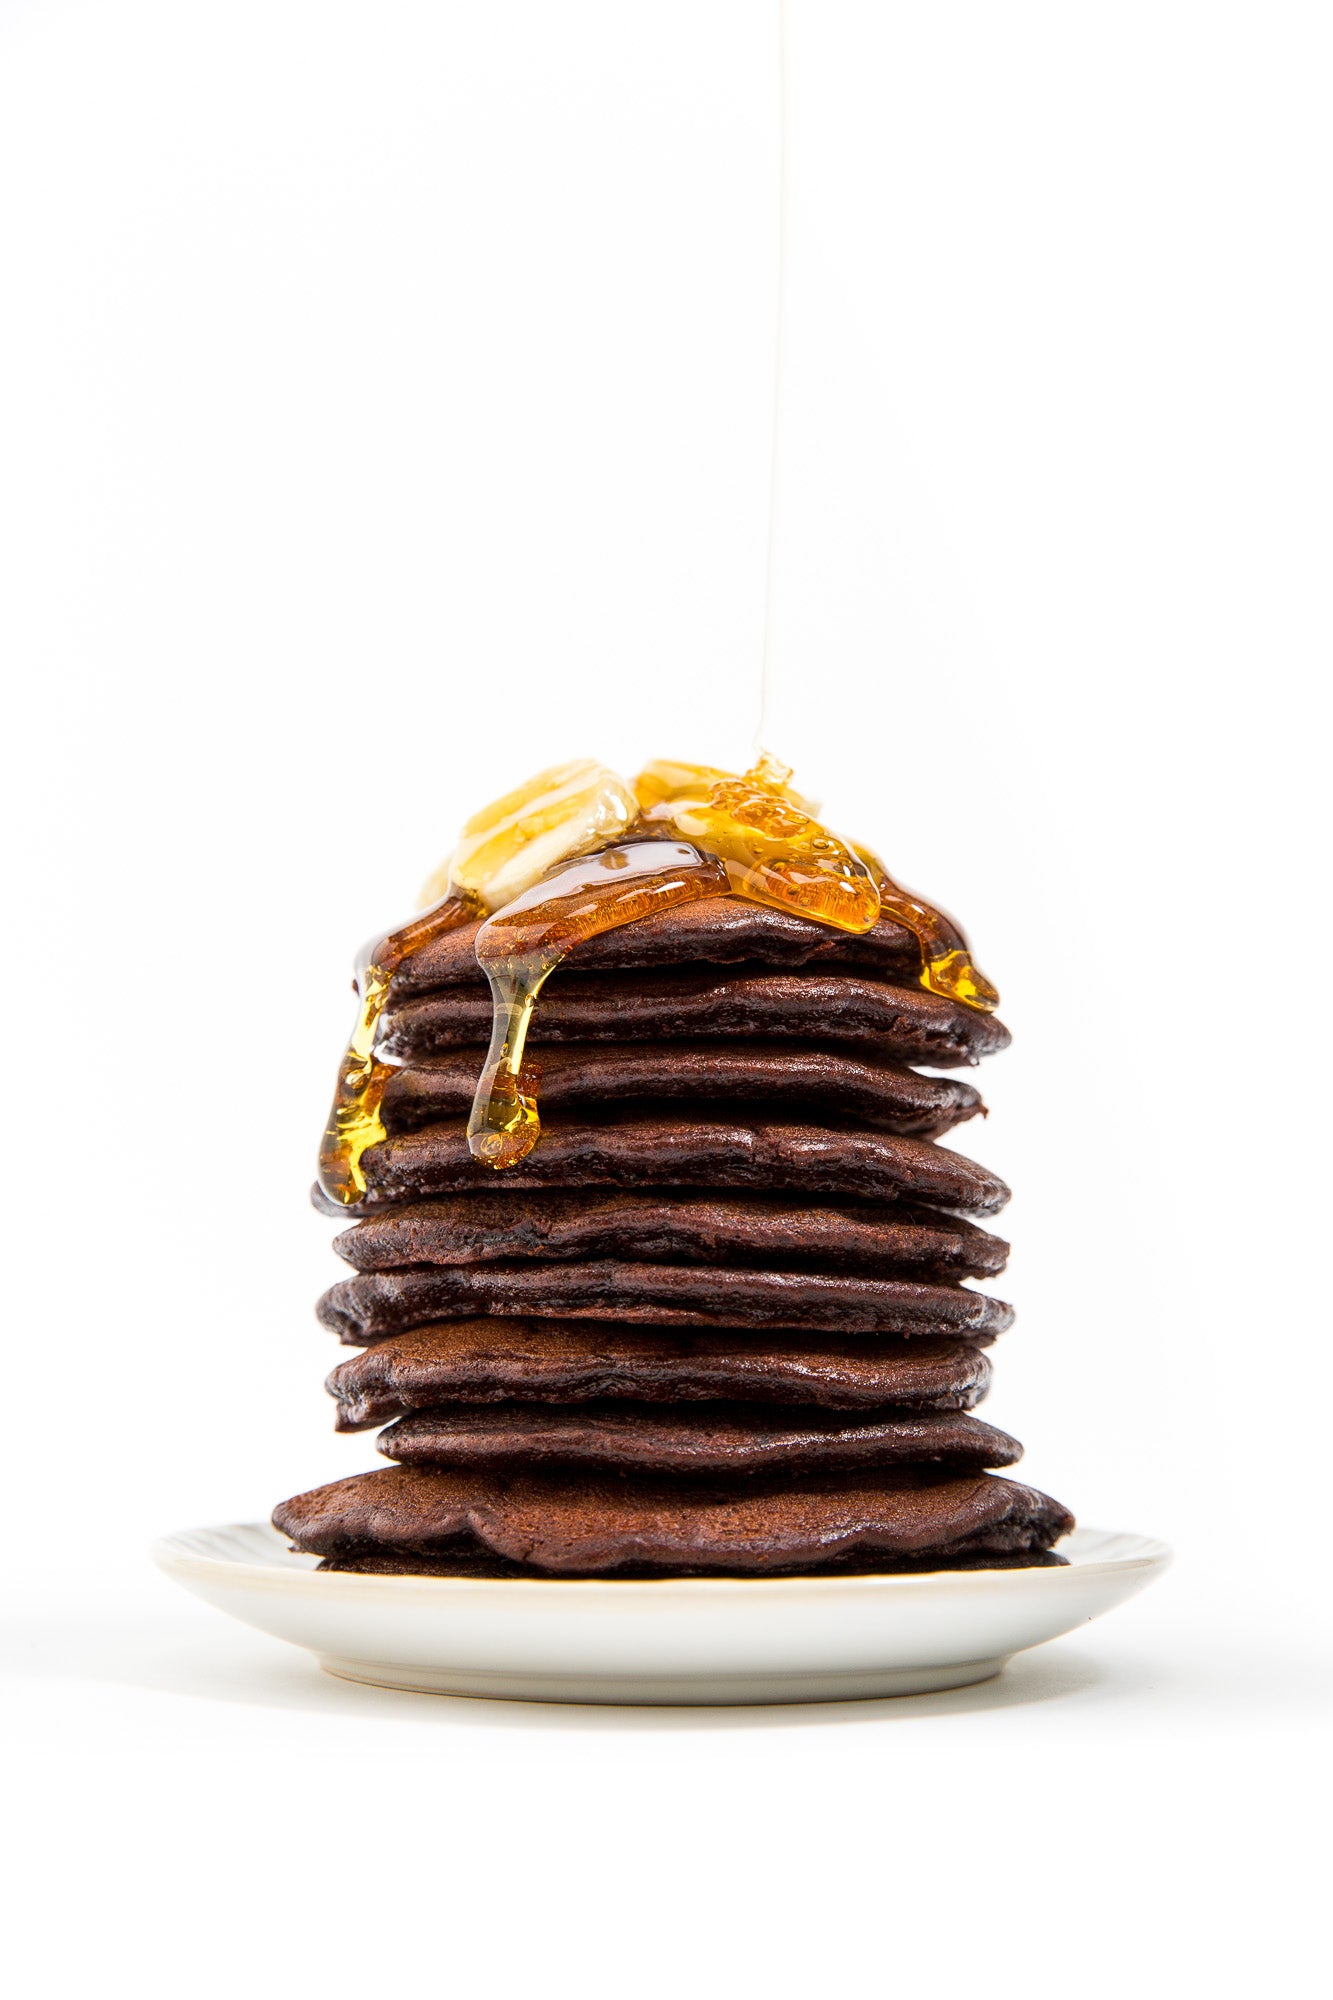 Stack of Miss Jones Baking Co Double Chocolate Stout Pancakes with melted butter and slices of banana on top